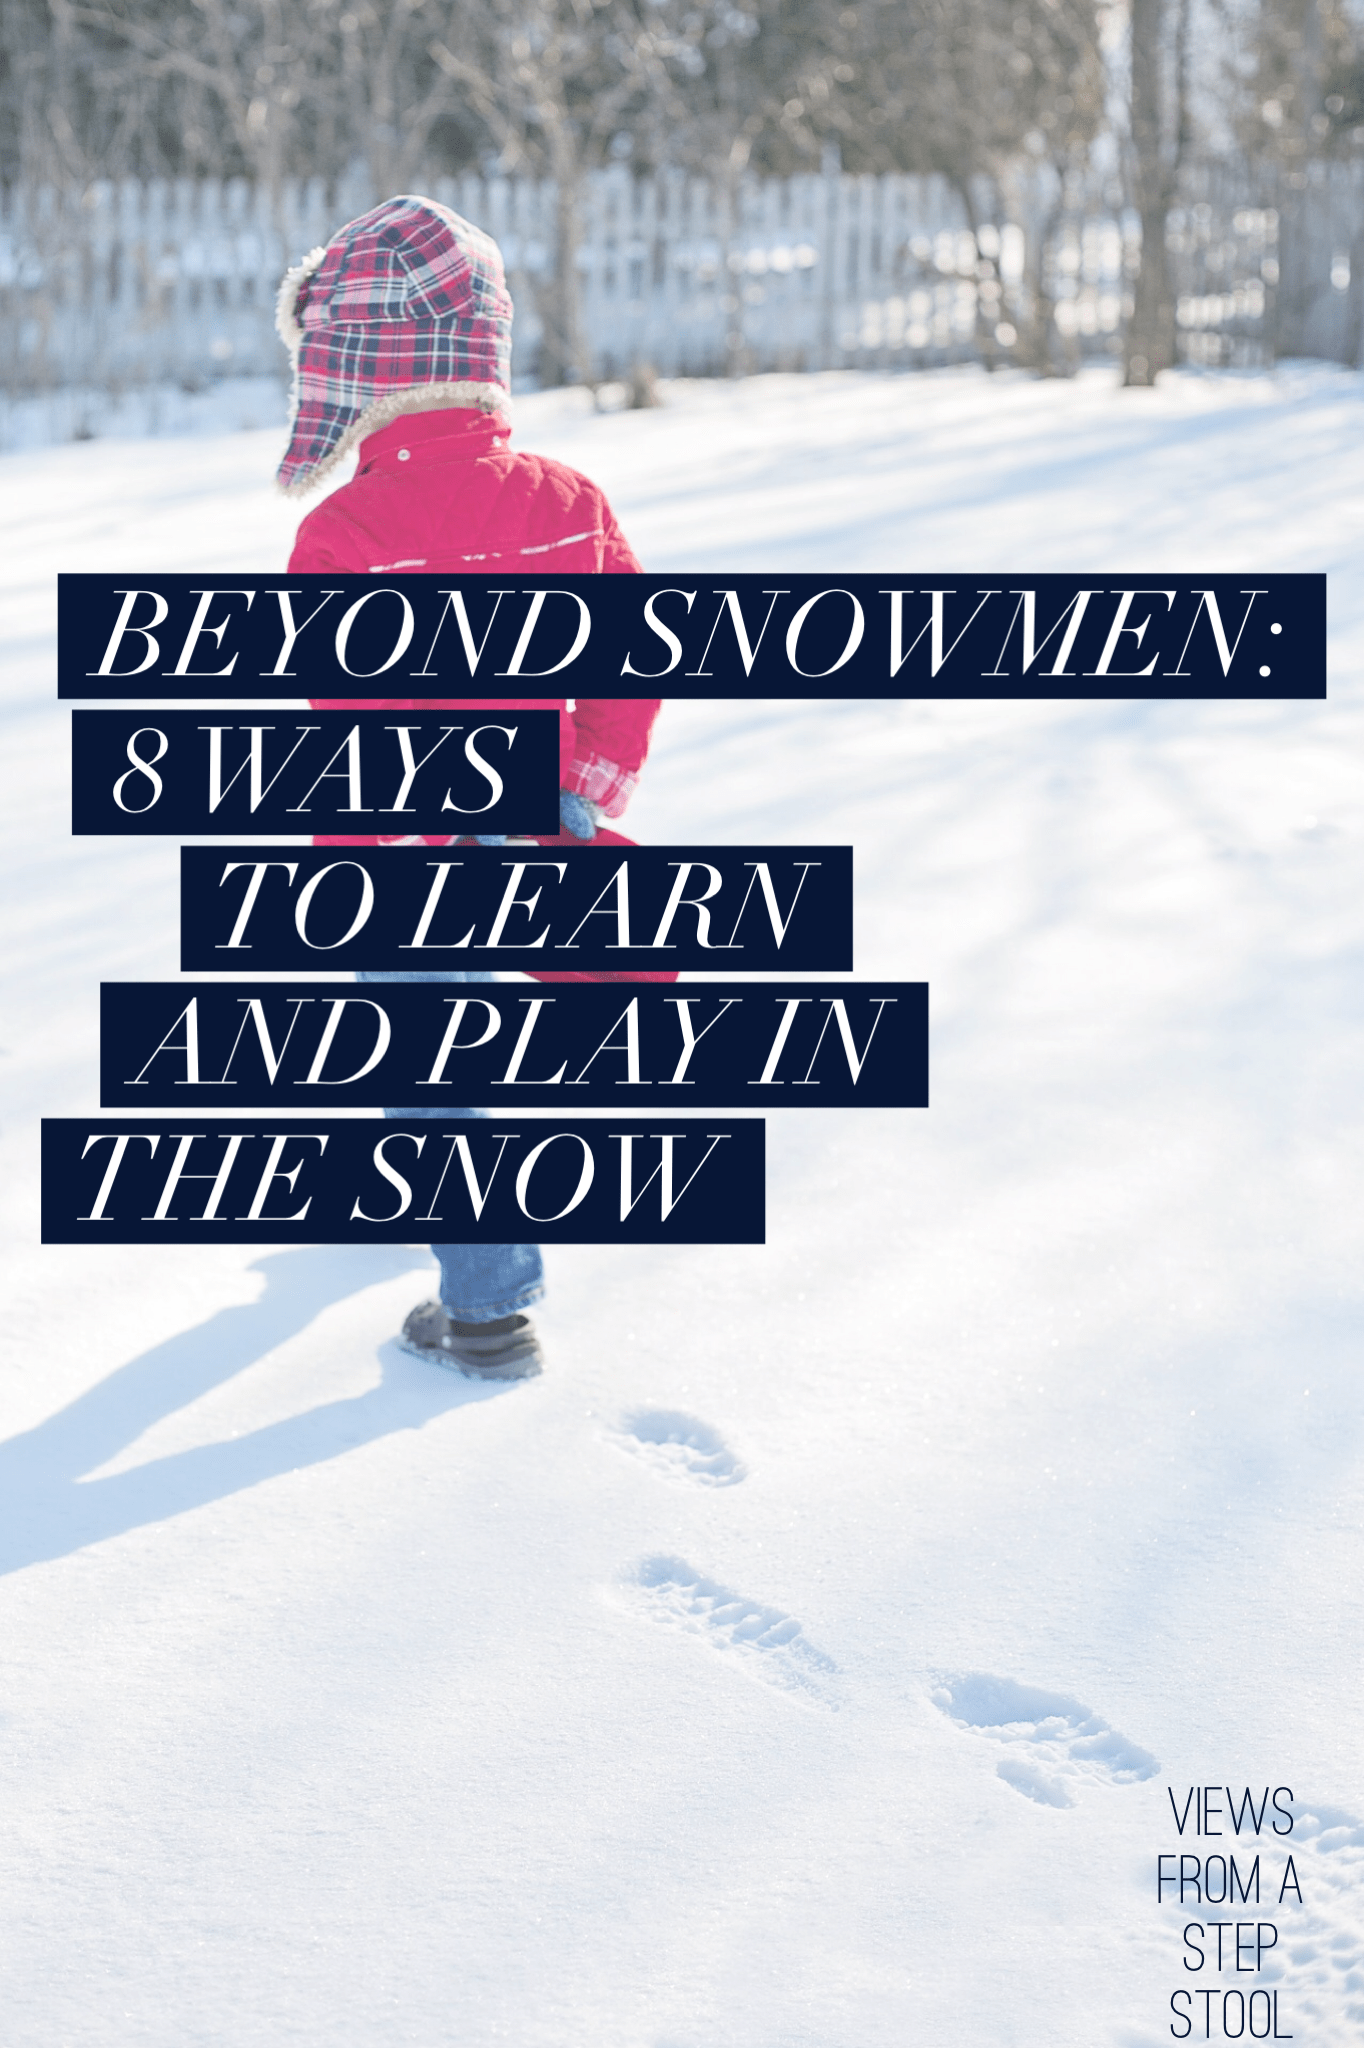 8 Ways to Play and Learn with Snow: Beyond Snowmen